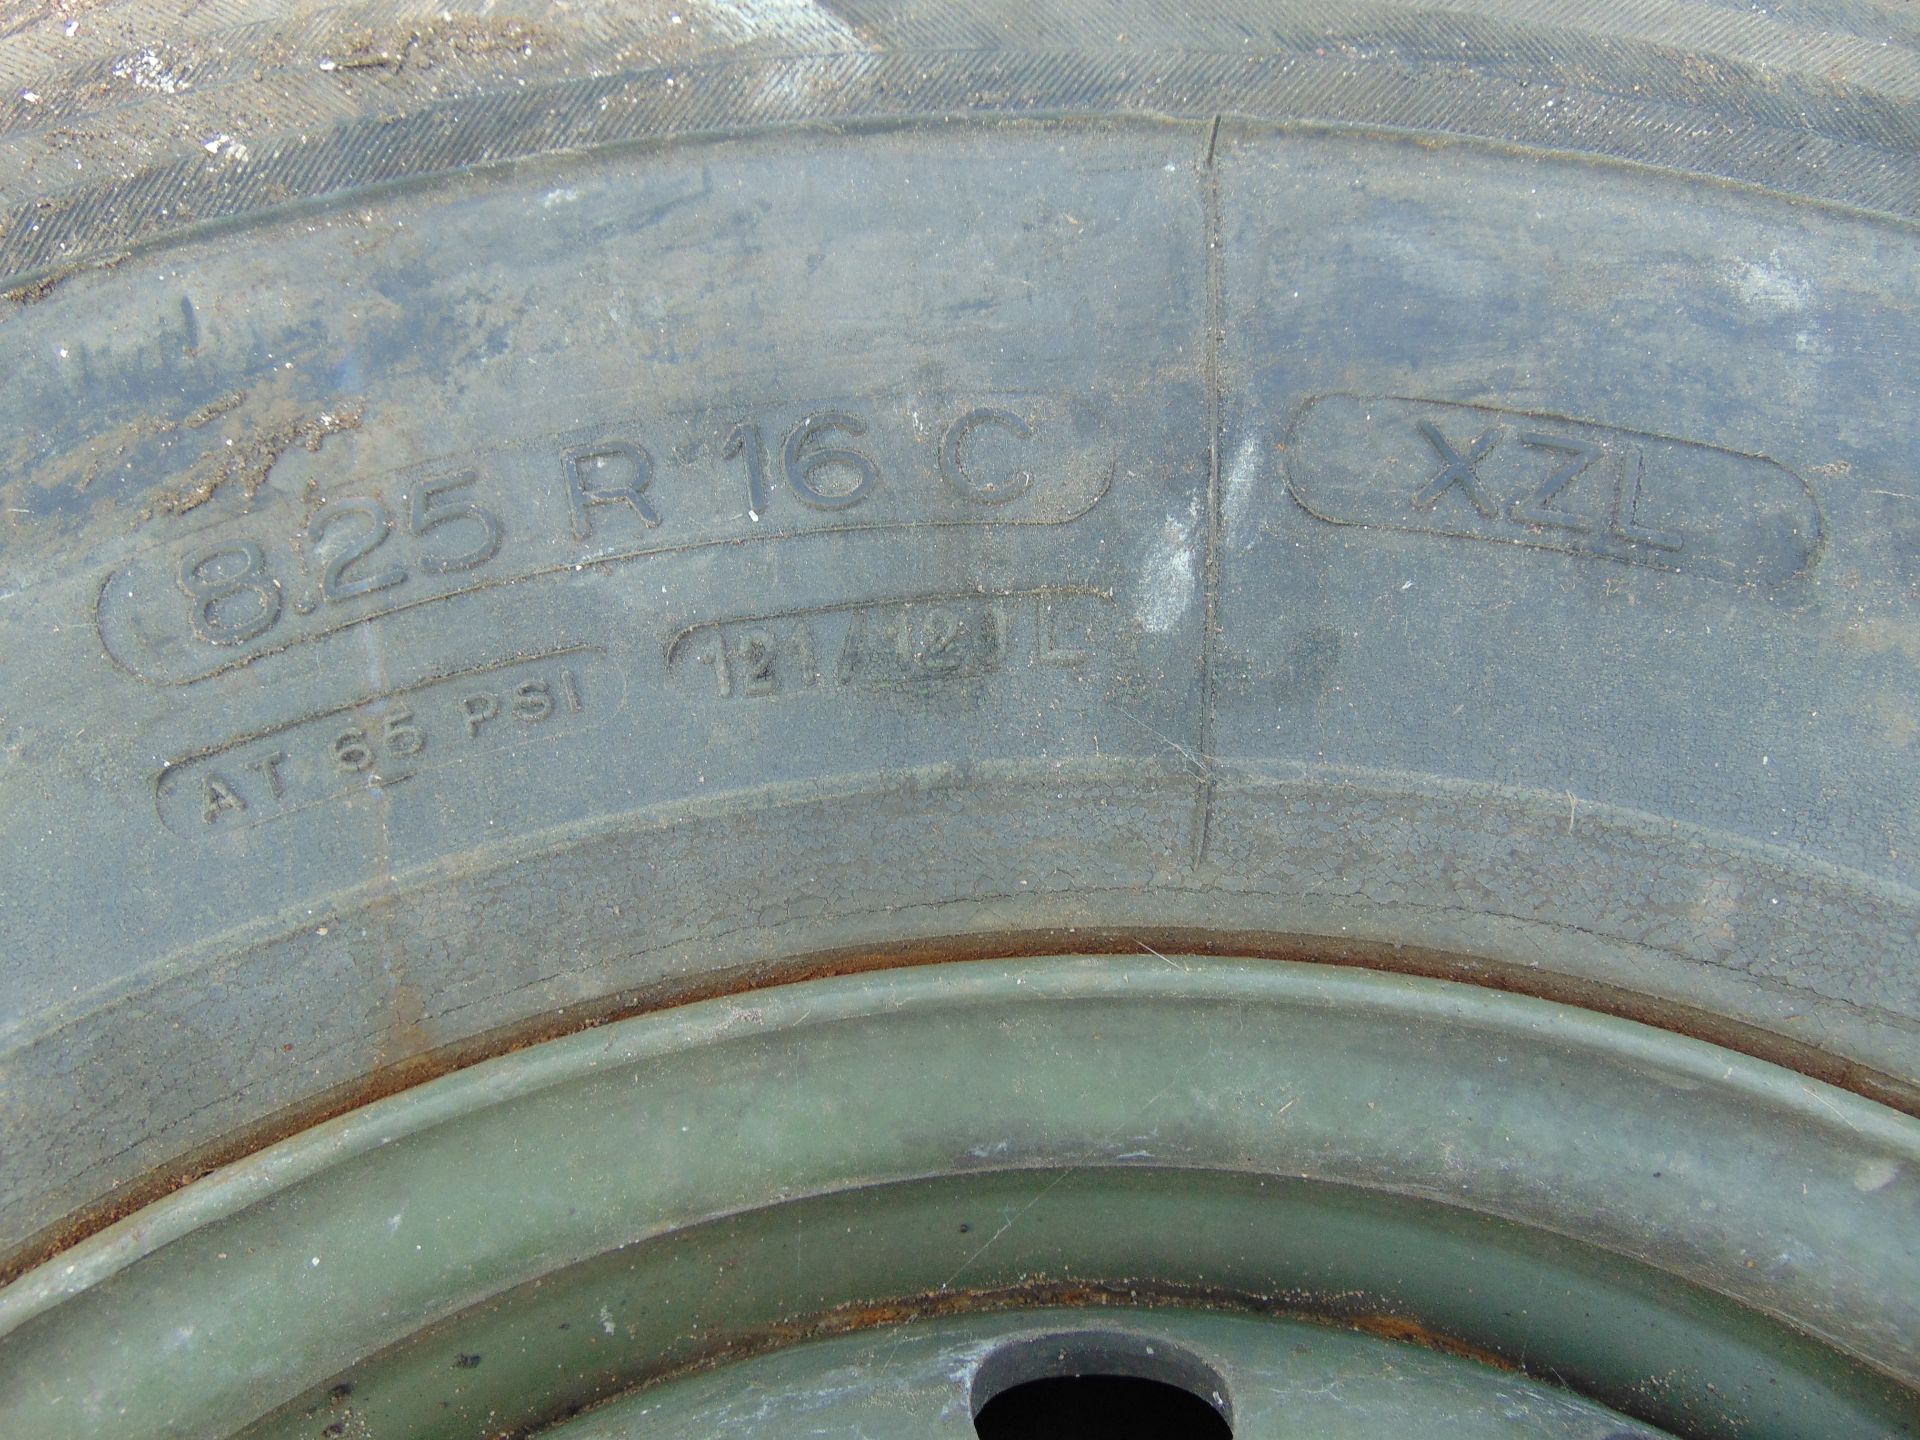 4 x Michelin XZL 8.25 R16 Tyres - Image 4 of 6